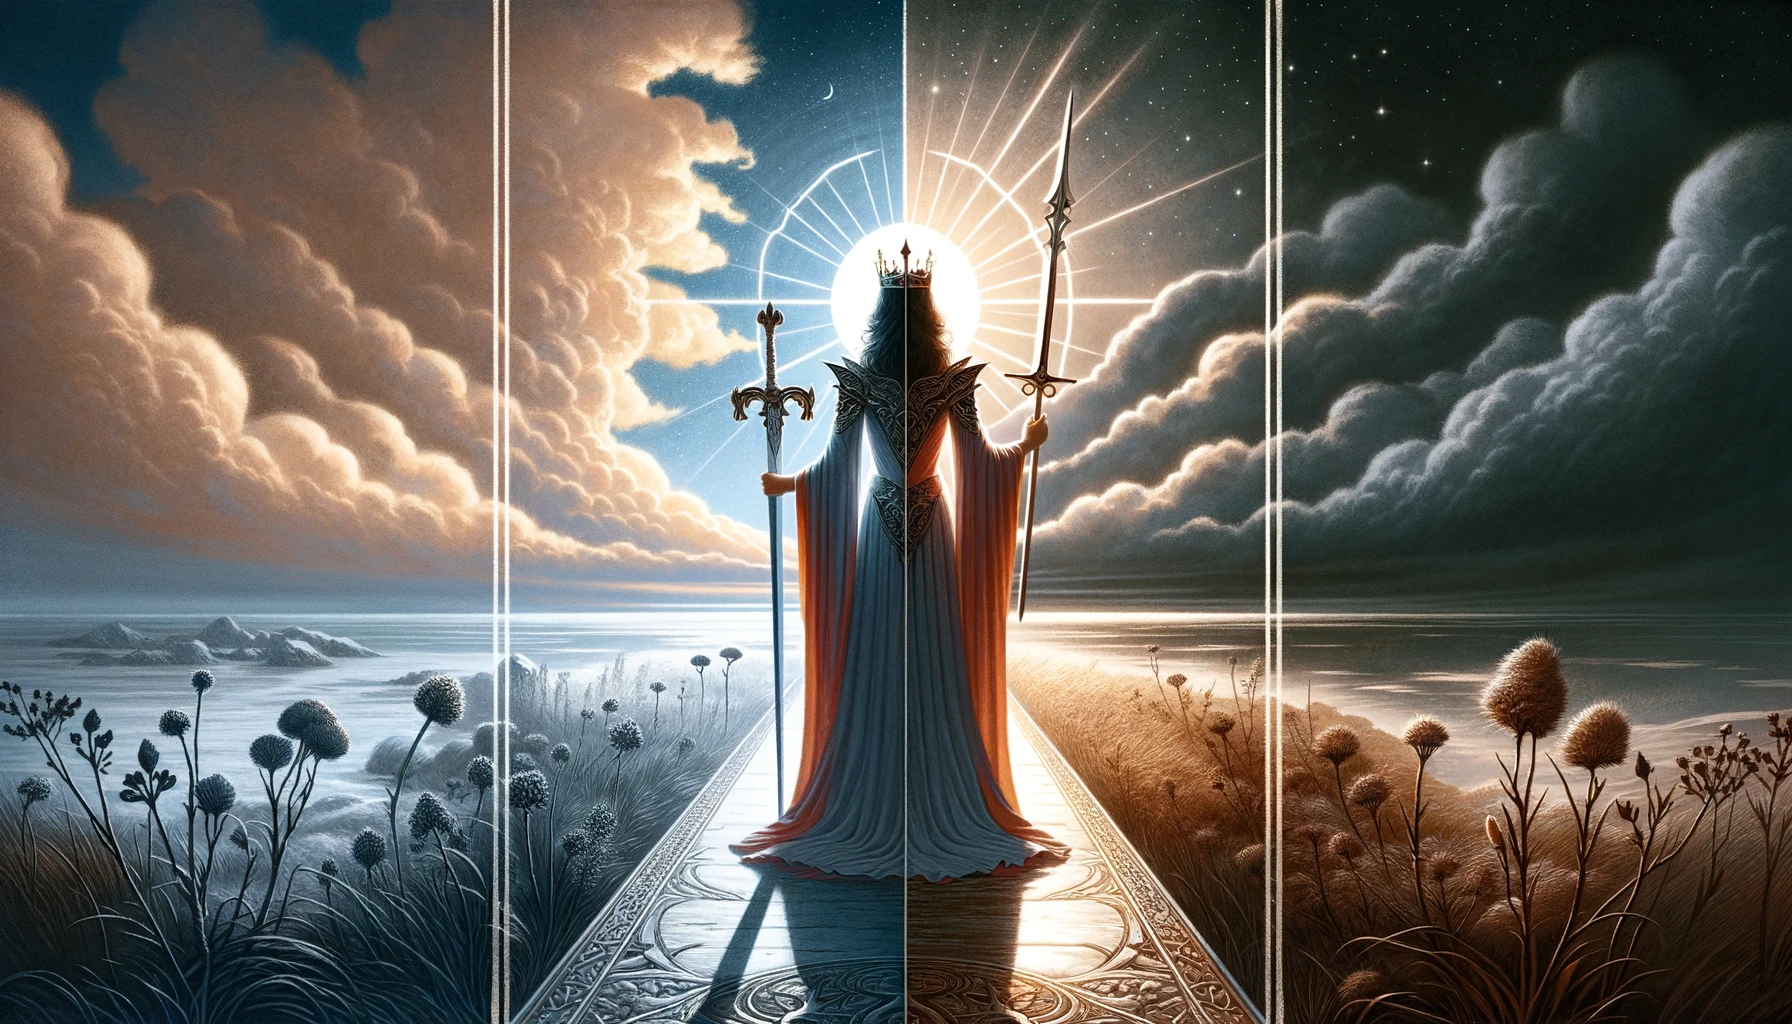 "The image portrays the Queen of Swords in decision-making contexts, symbolizing decisiveness and truth in a 'Yes' scenario, and caution and the need for further consideration in a 'No' scenario. It enriches the article by depicting the complexities and importance of insight and clarity in decision-making processes."